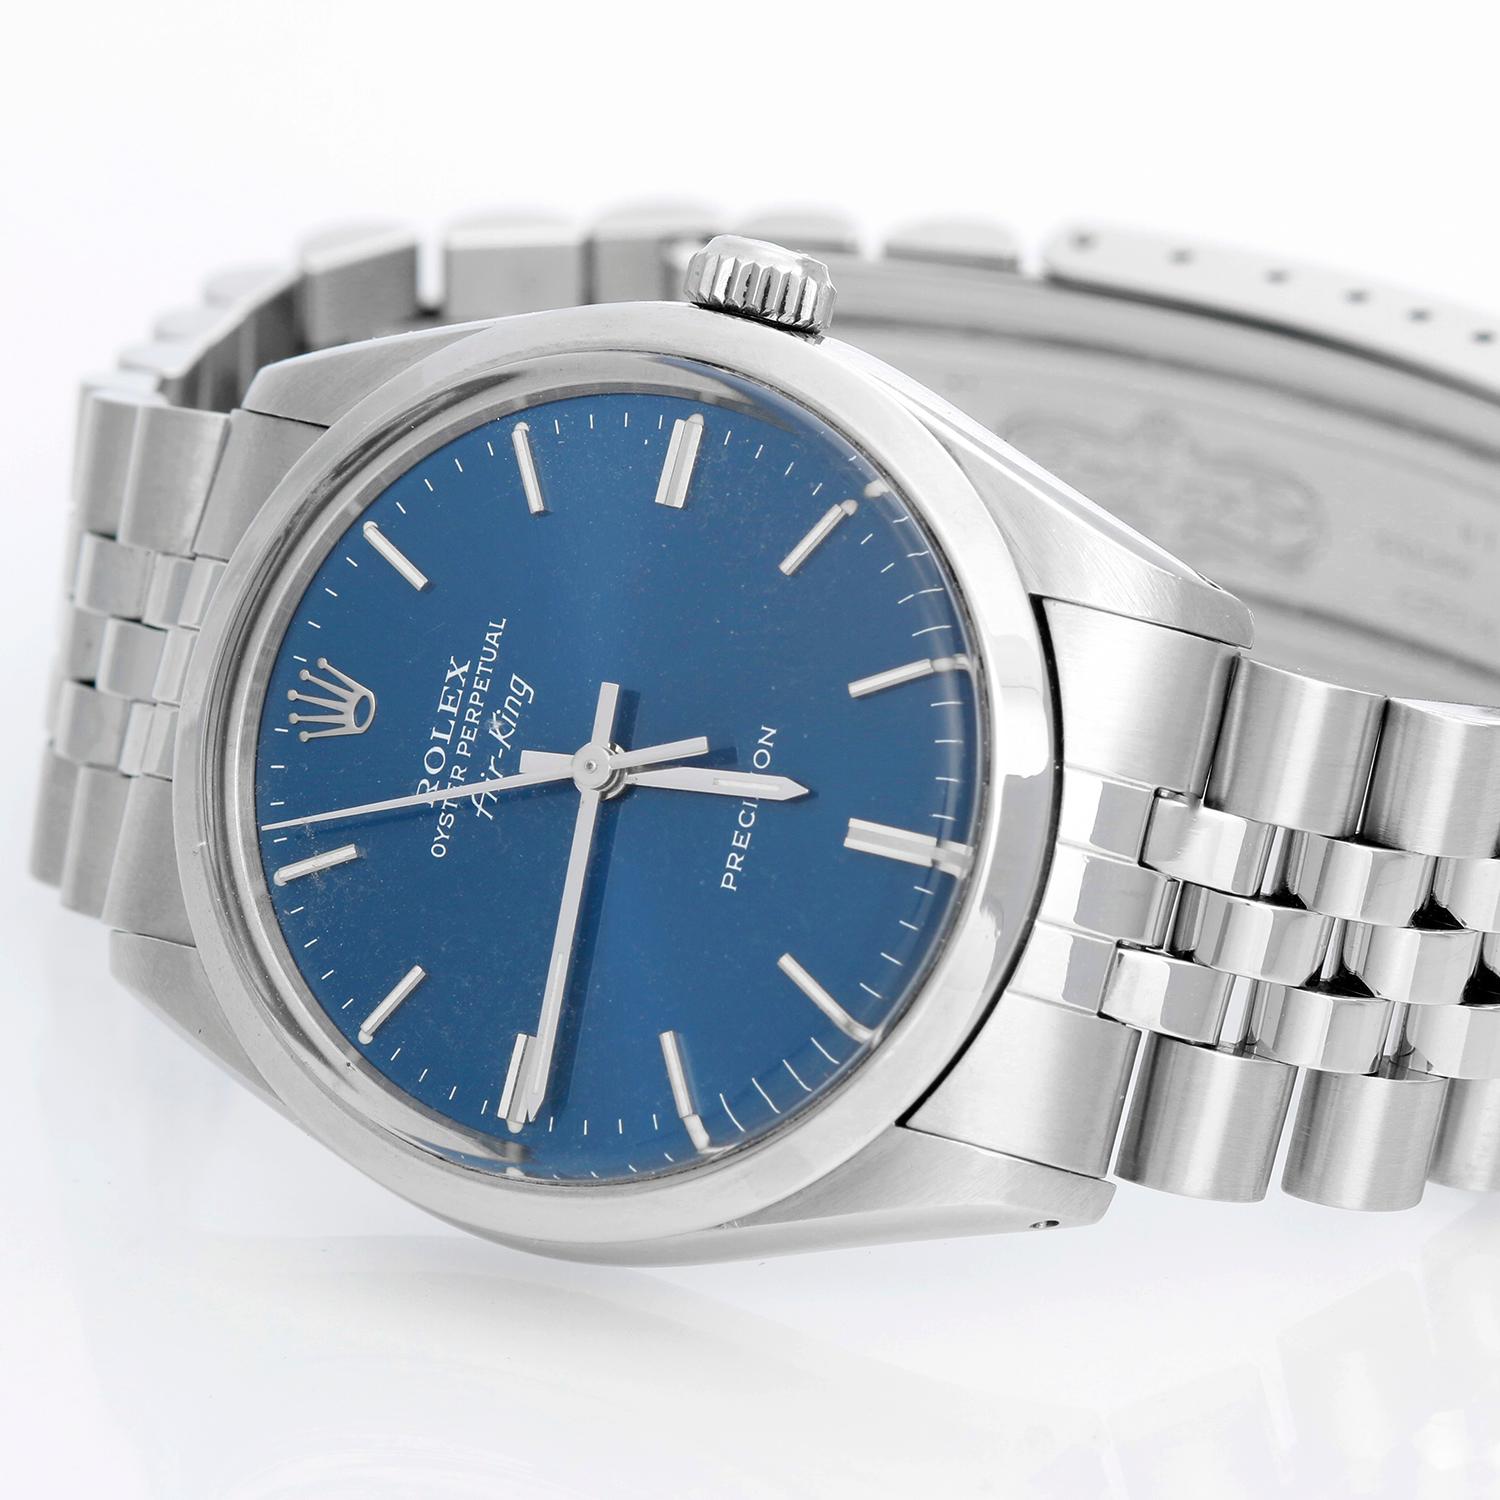 Vintage Rolex Air-King Men's Stainless Steel Oyster Perpetual Watch 5500 - Automatic winding, acrylic crystal. Stainless steel case with smooth bezel (34mm diameter). Blue dial with stick hour markers . Stainless steel Jubilee bracelet . Pre-owned